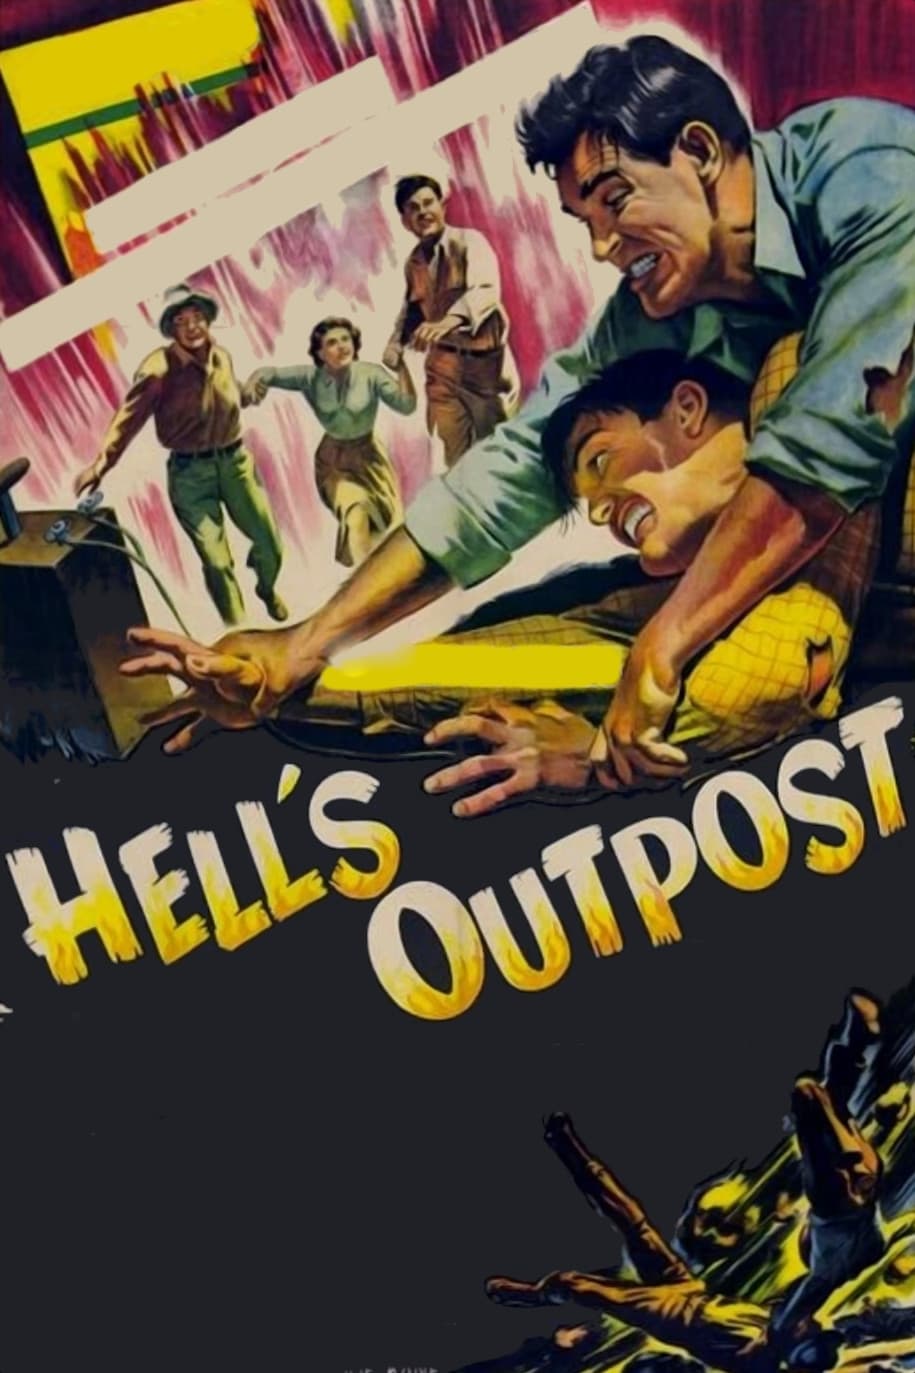 Hell's Outpost film